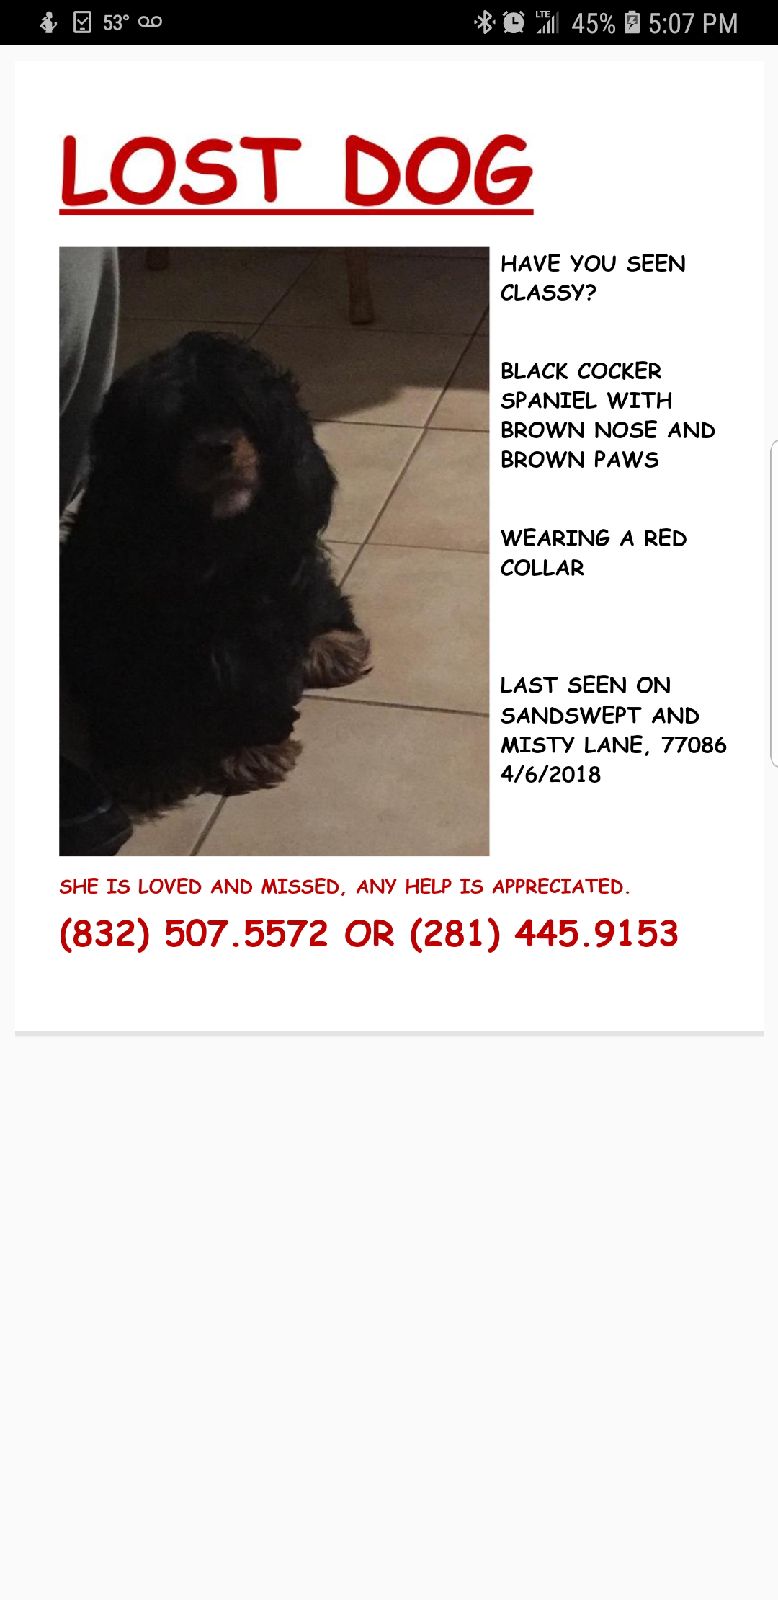 Image of Classy, Lost Dog